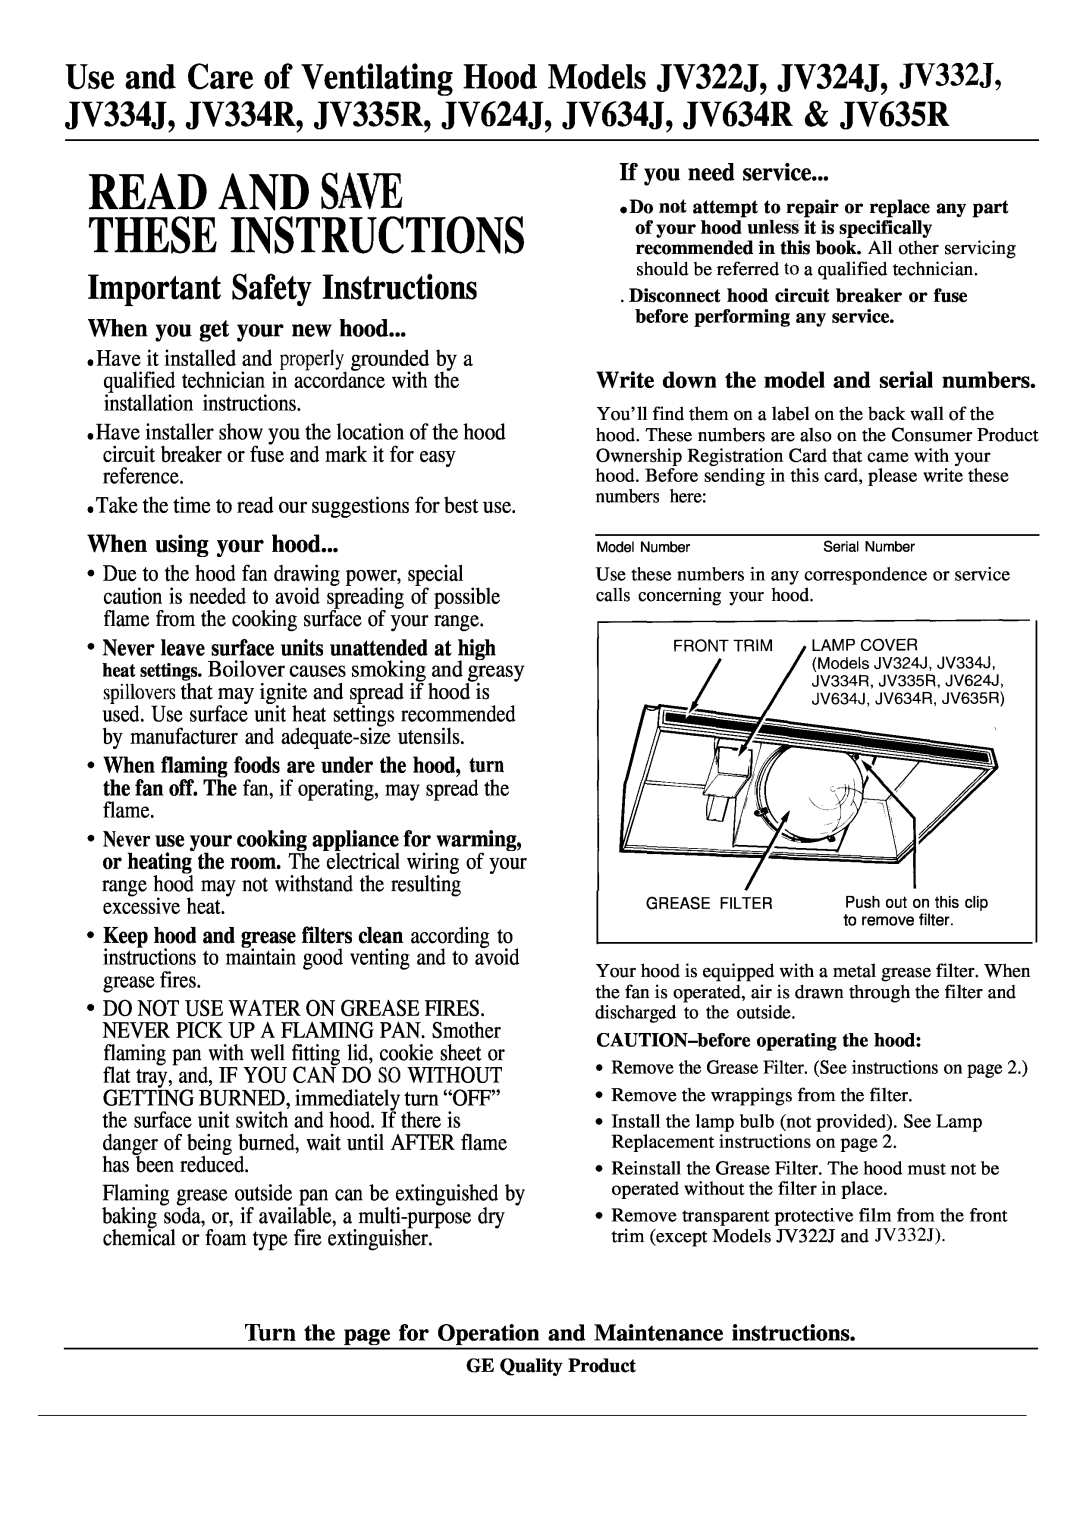 GE JV332J important safety instructions Important Safety Instructions, When you get your new hood, When using your hood 